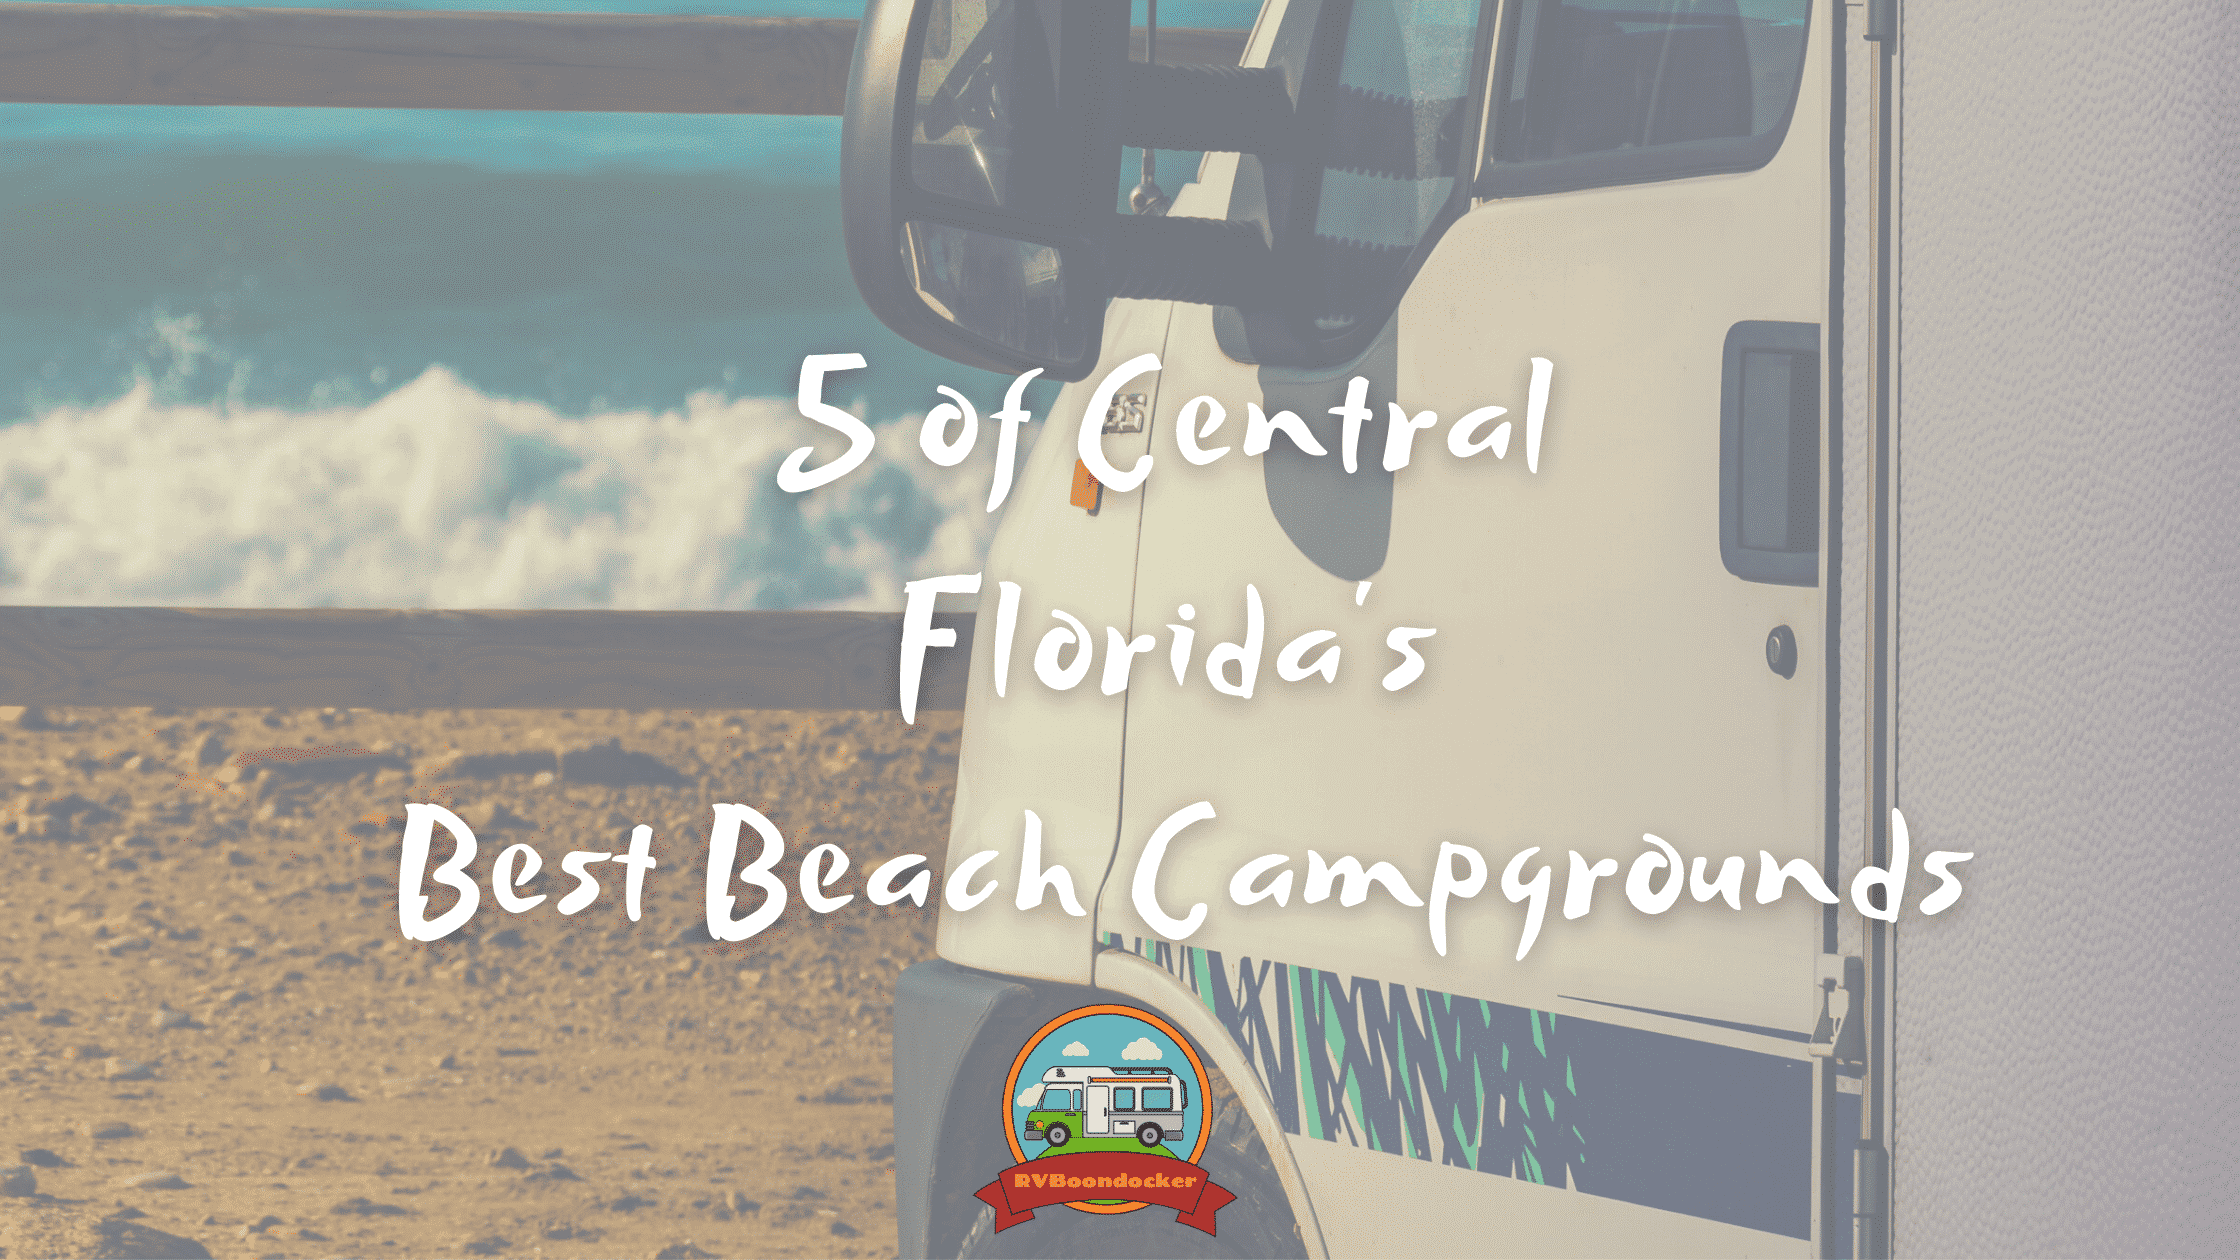 5 of central floridas beach camping campgrounds